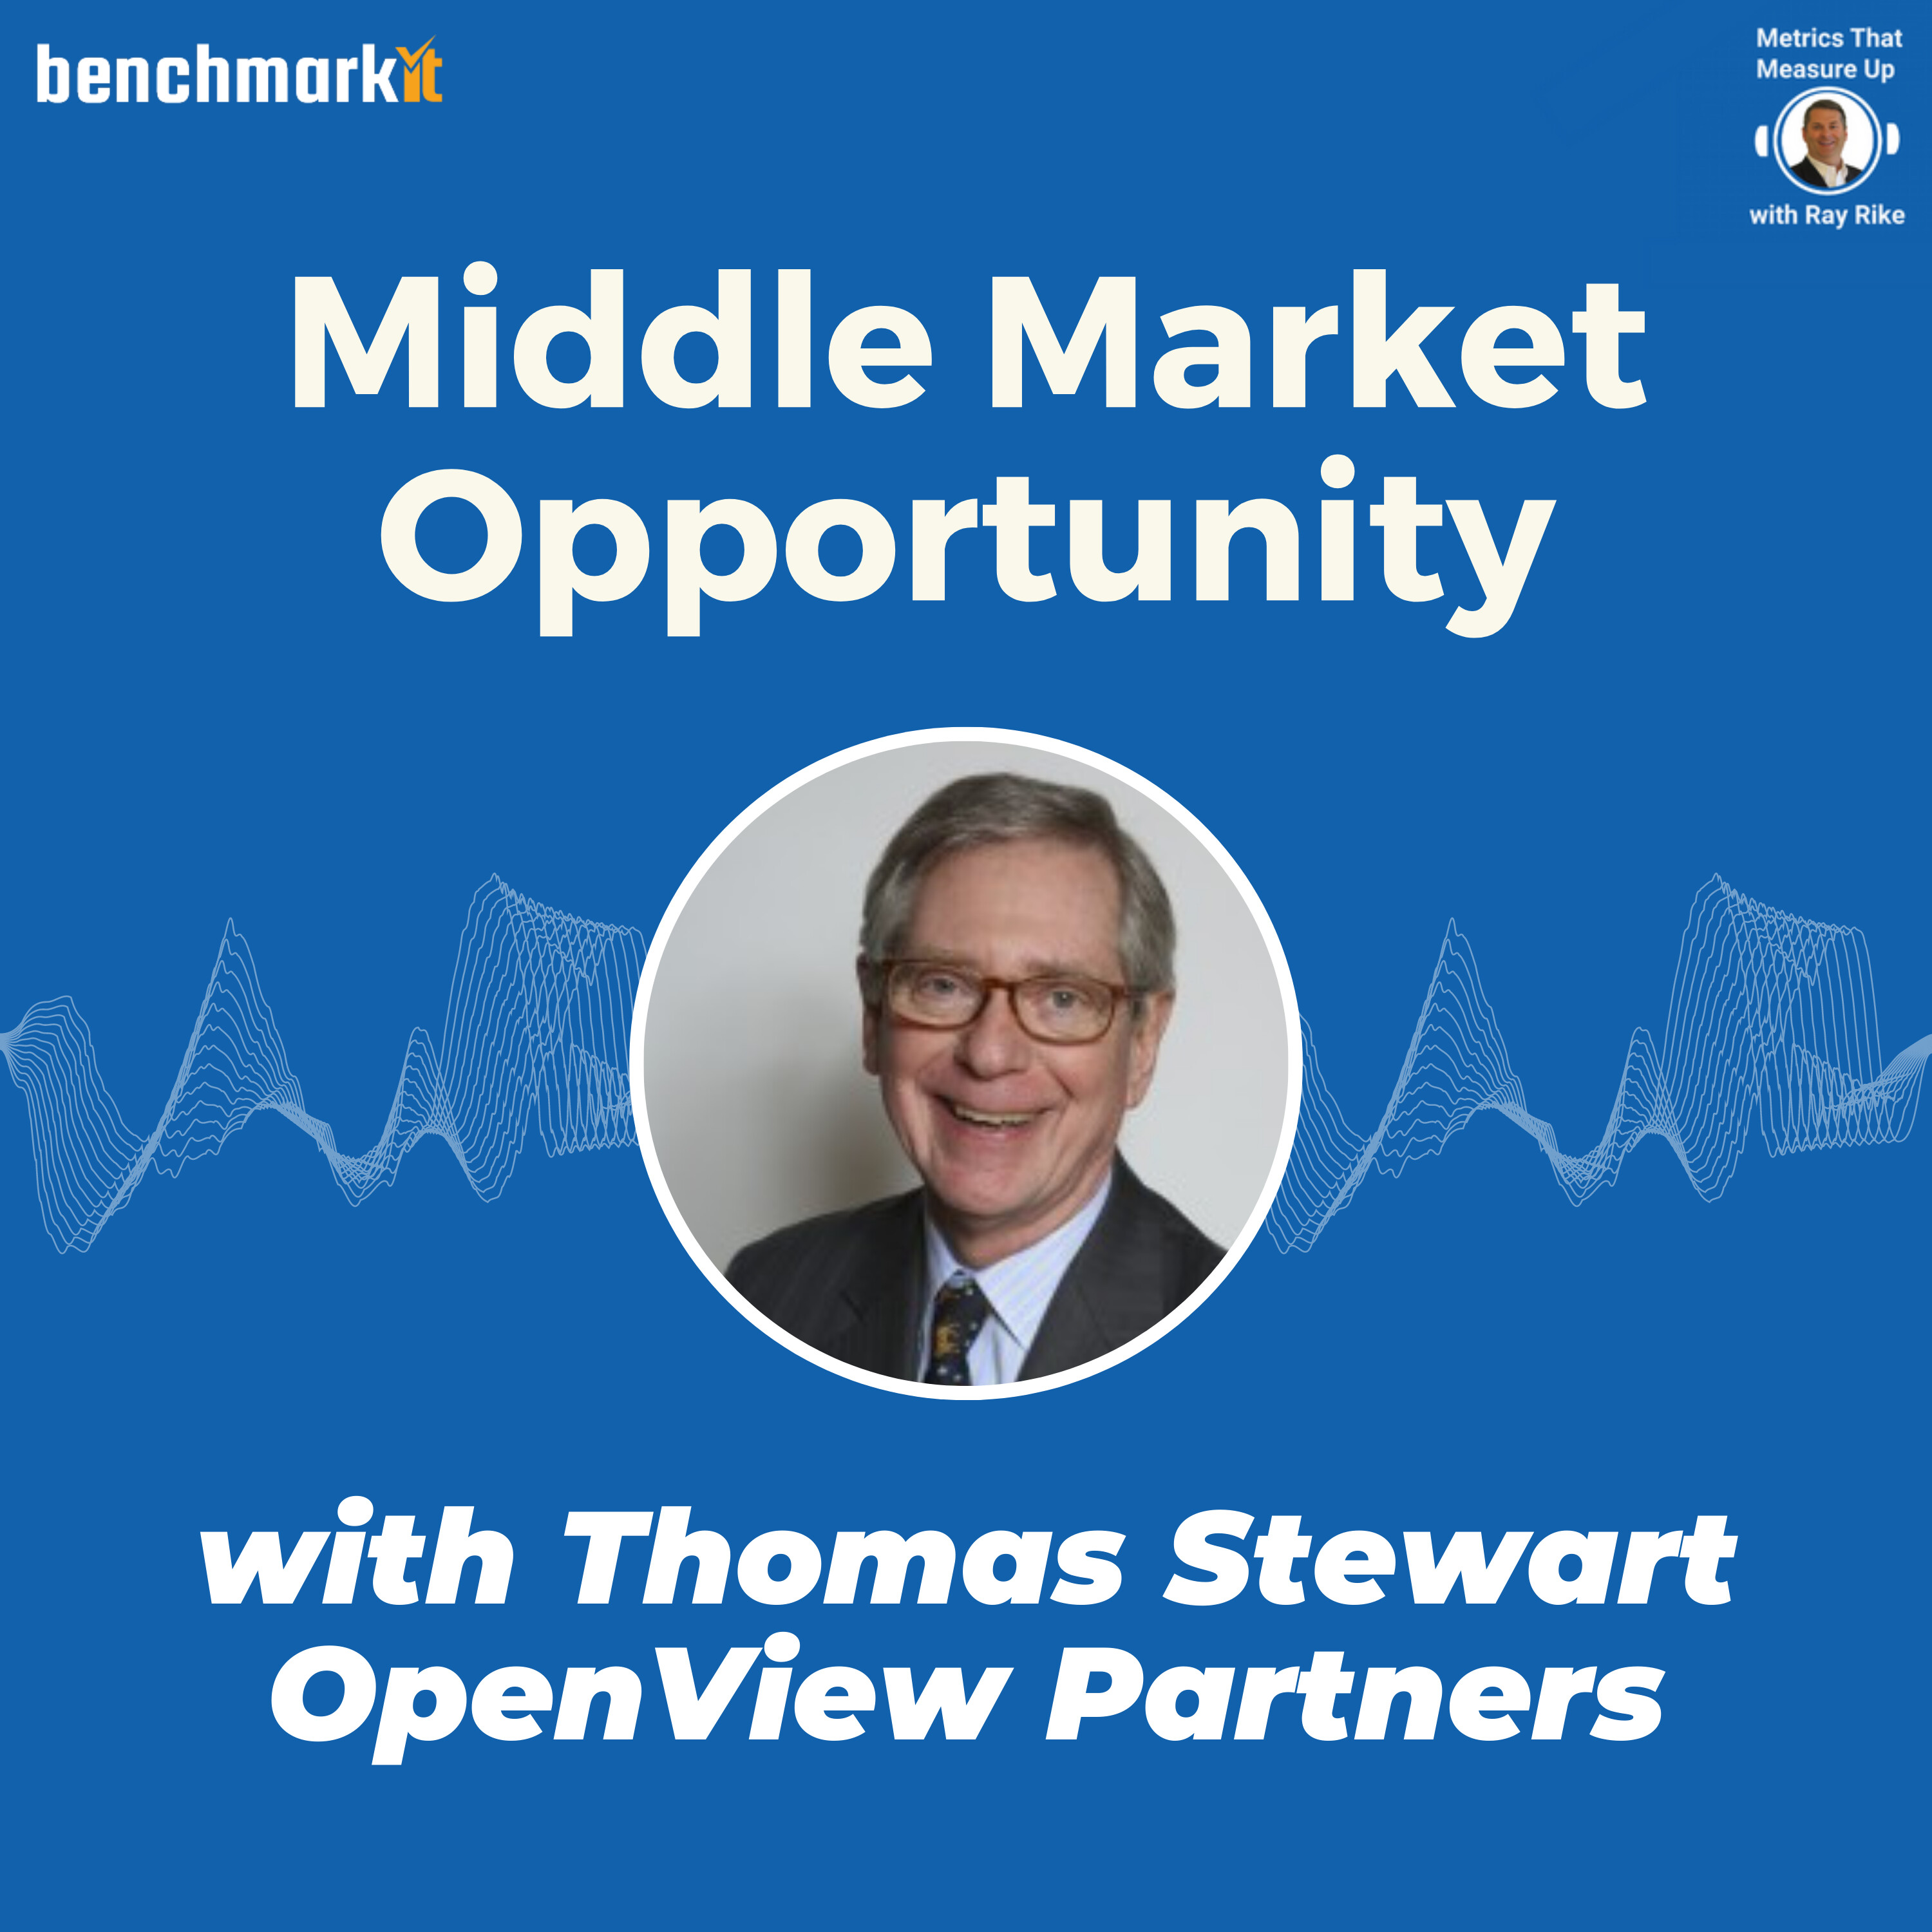 Middle Market Opportunity - with Thomas Stewart - National Center for the Middle Market